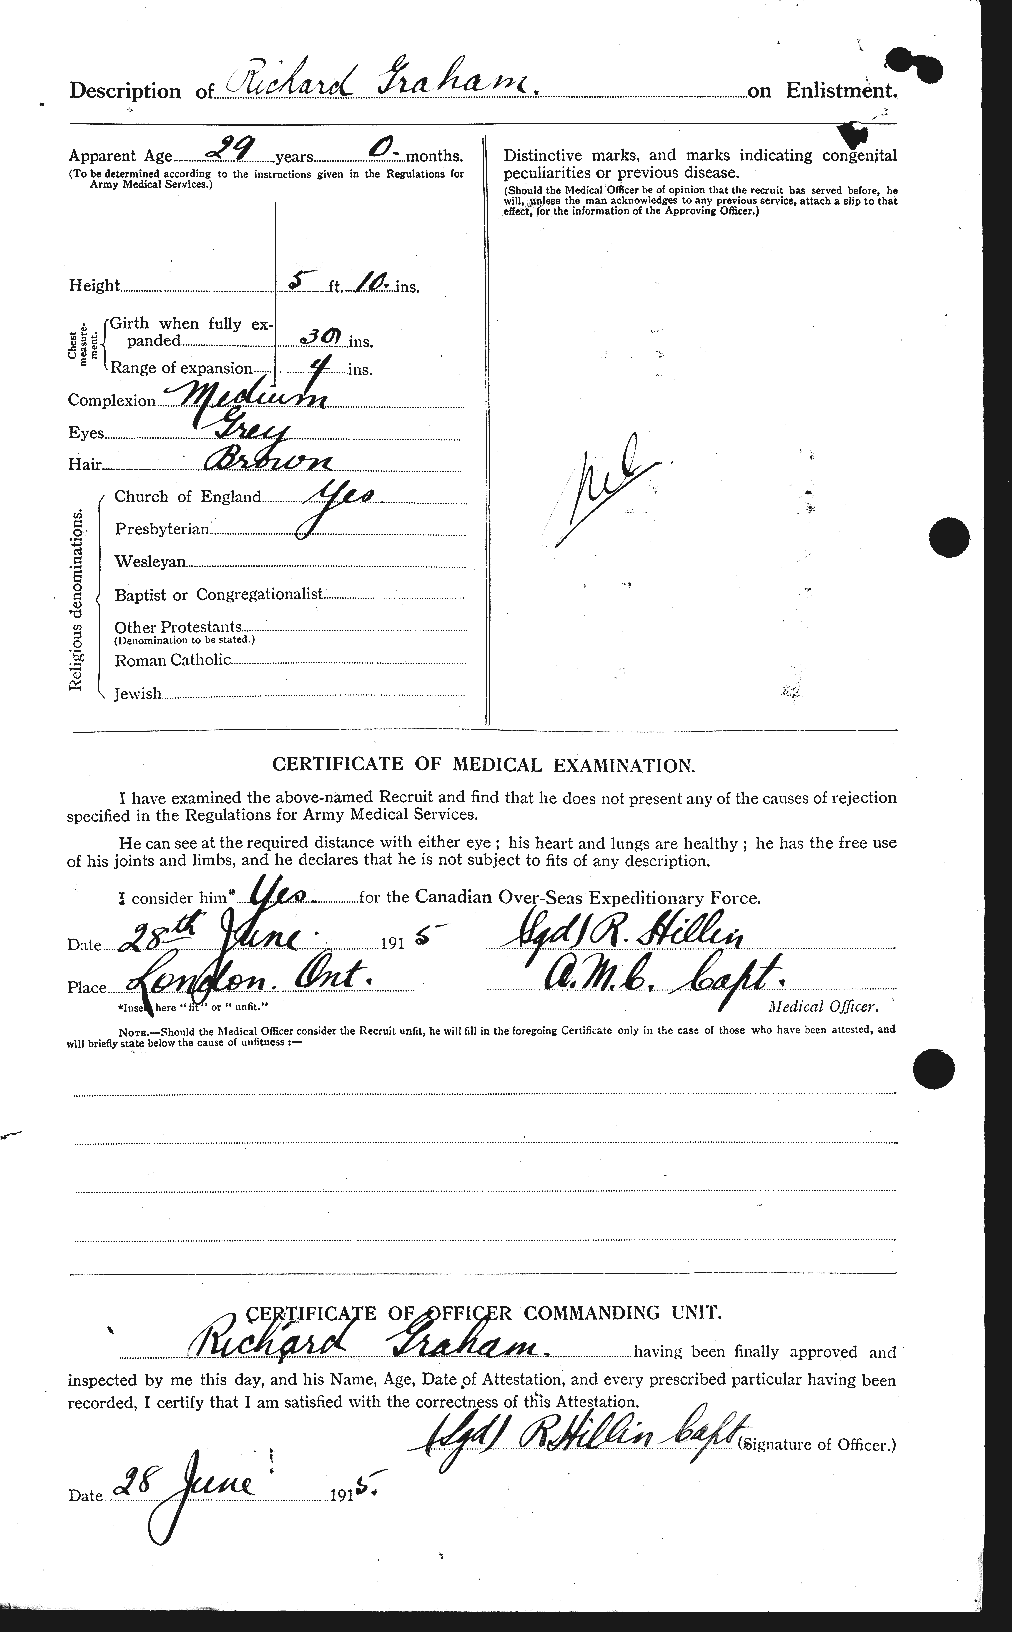 Personnel Records of the First World War - CEF 359367b